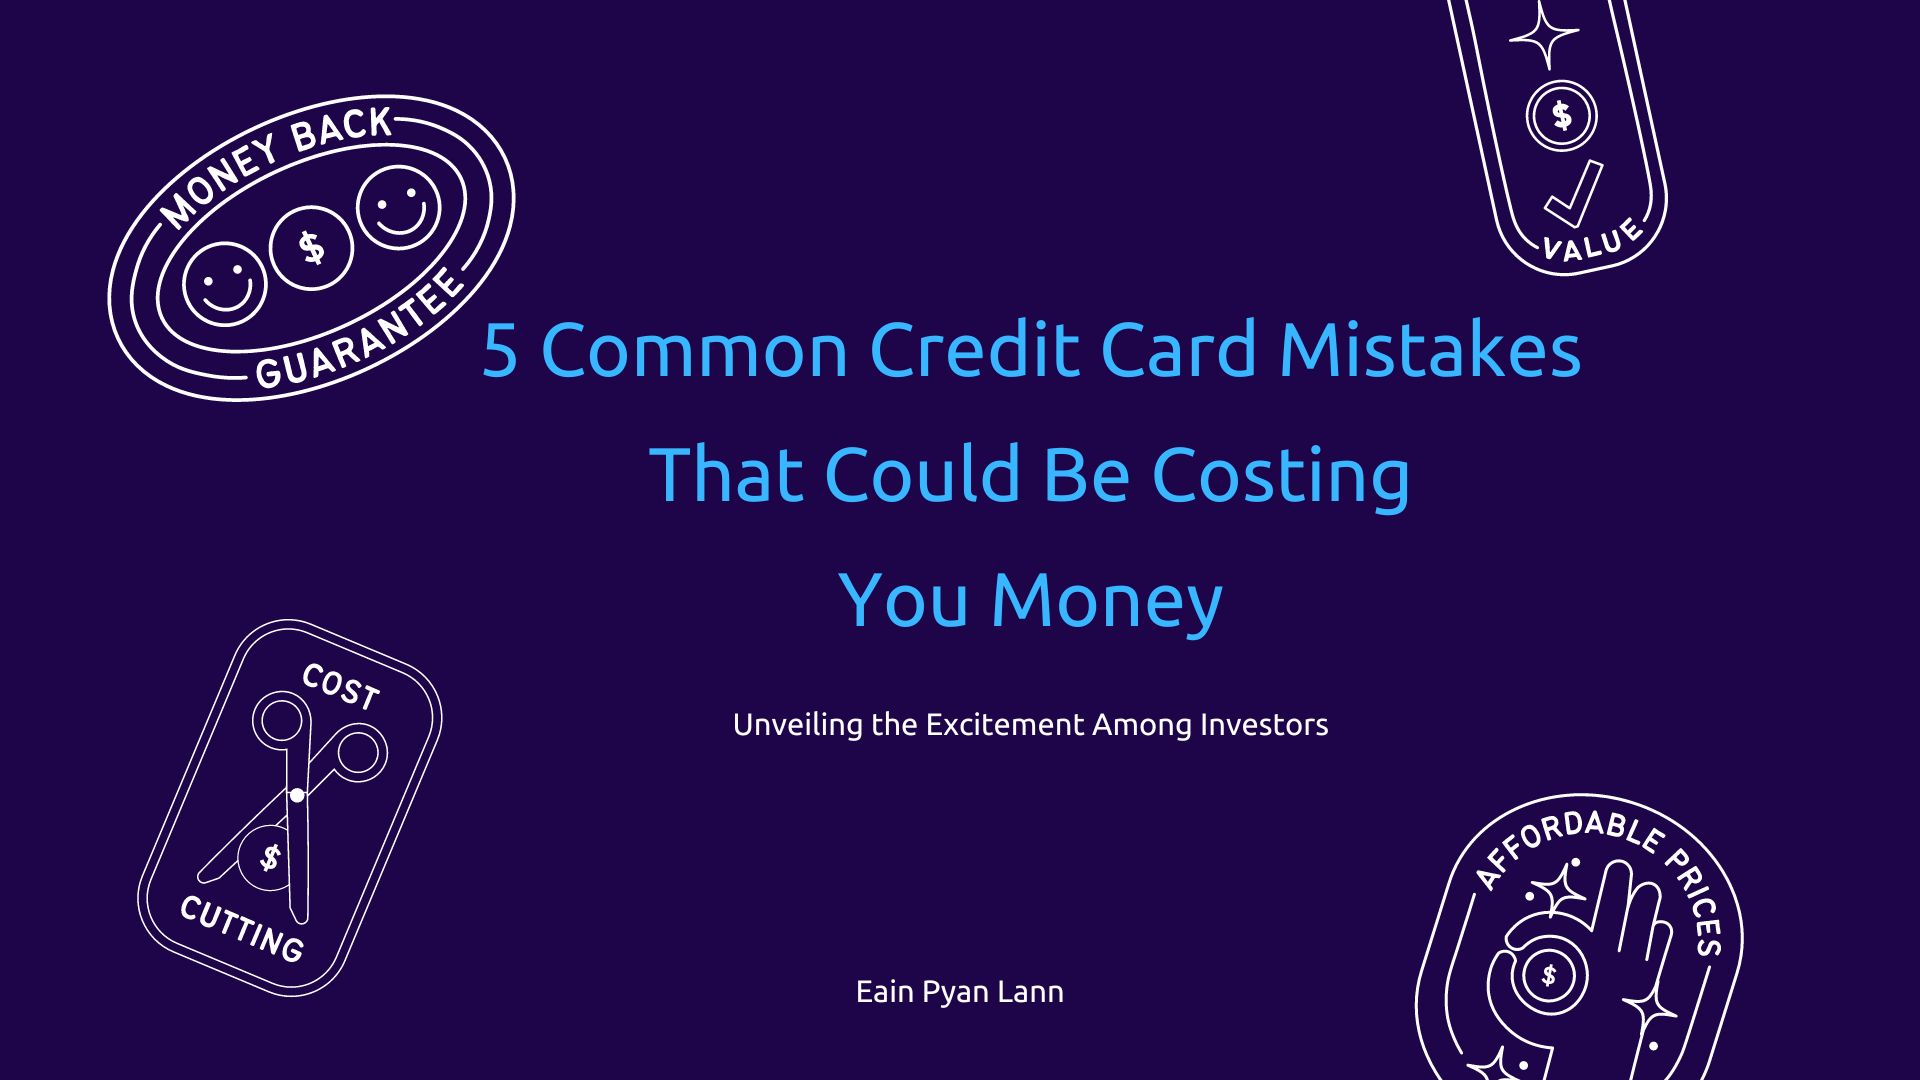 5 Common Credit Card Mistakes That Could Be Costing You Money